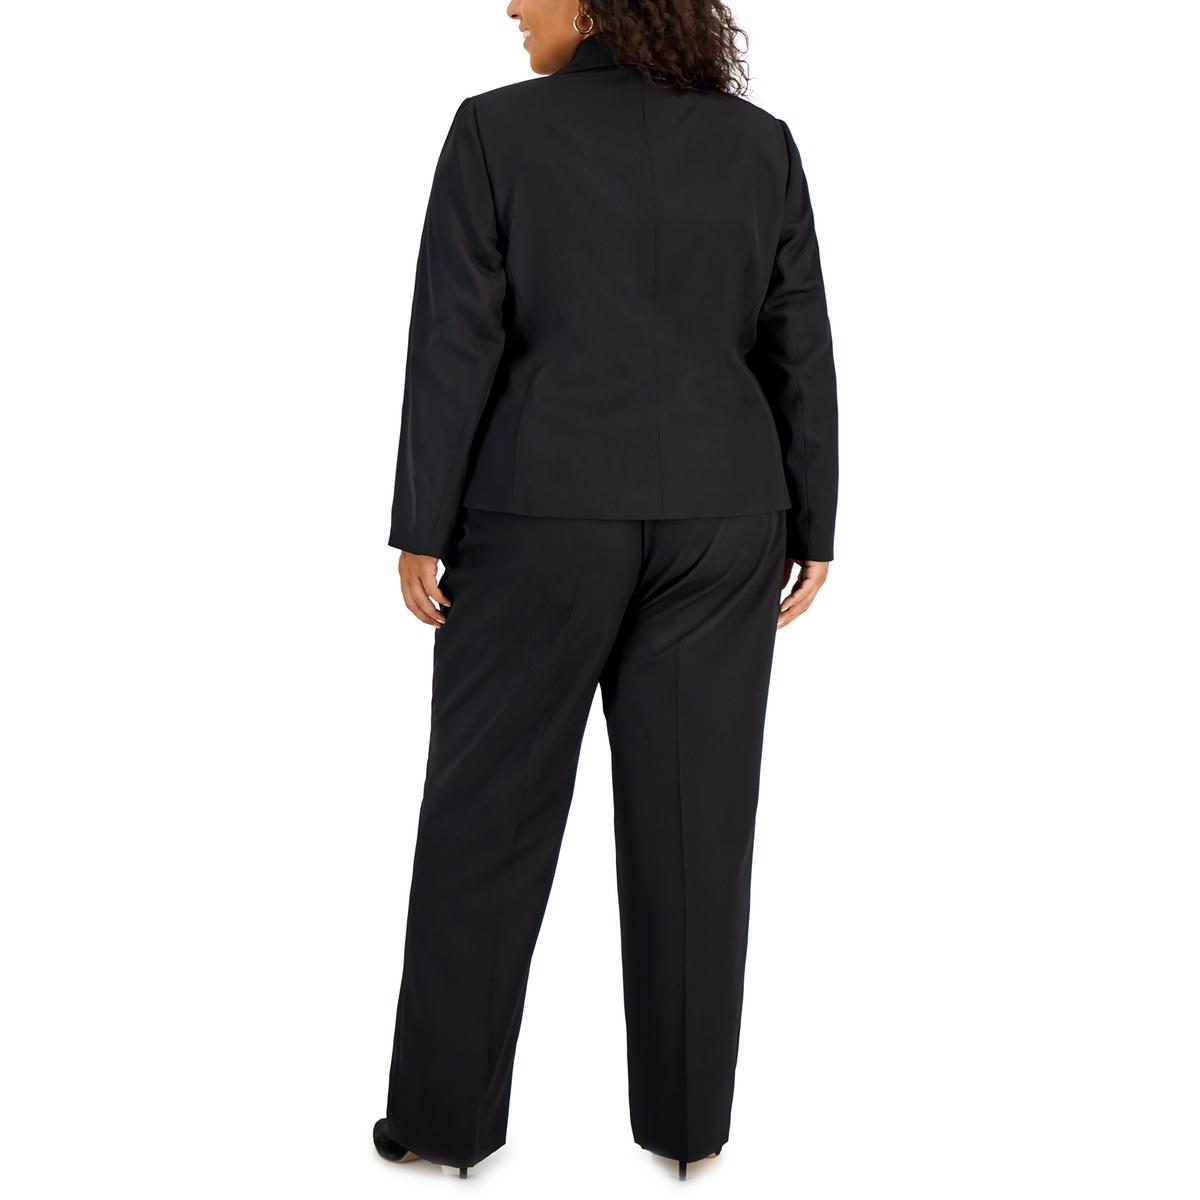 Plus Size Suits  Women's Plus Size Dress Suits from Sears